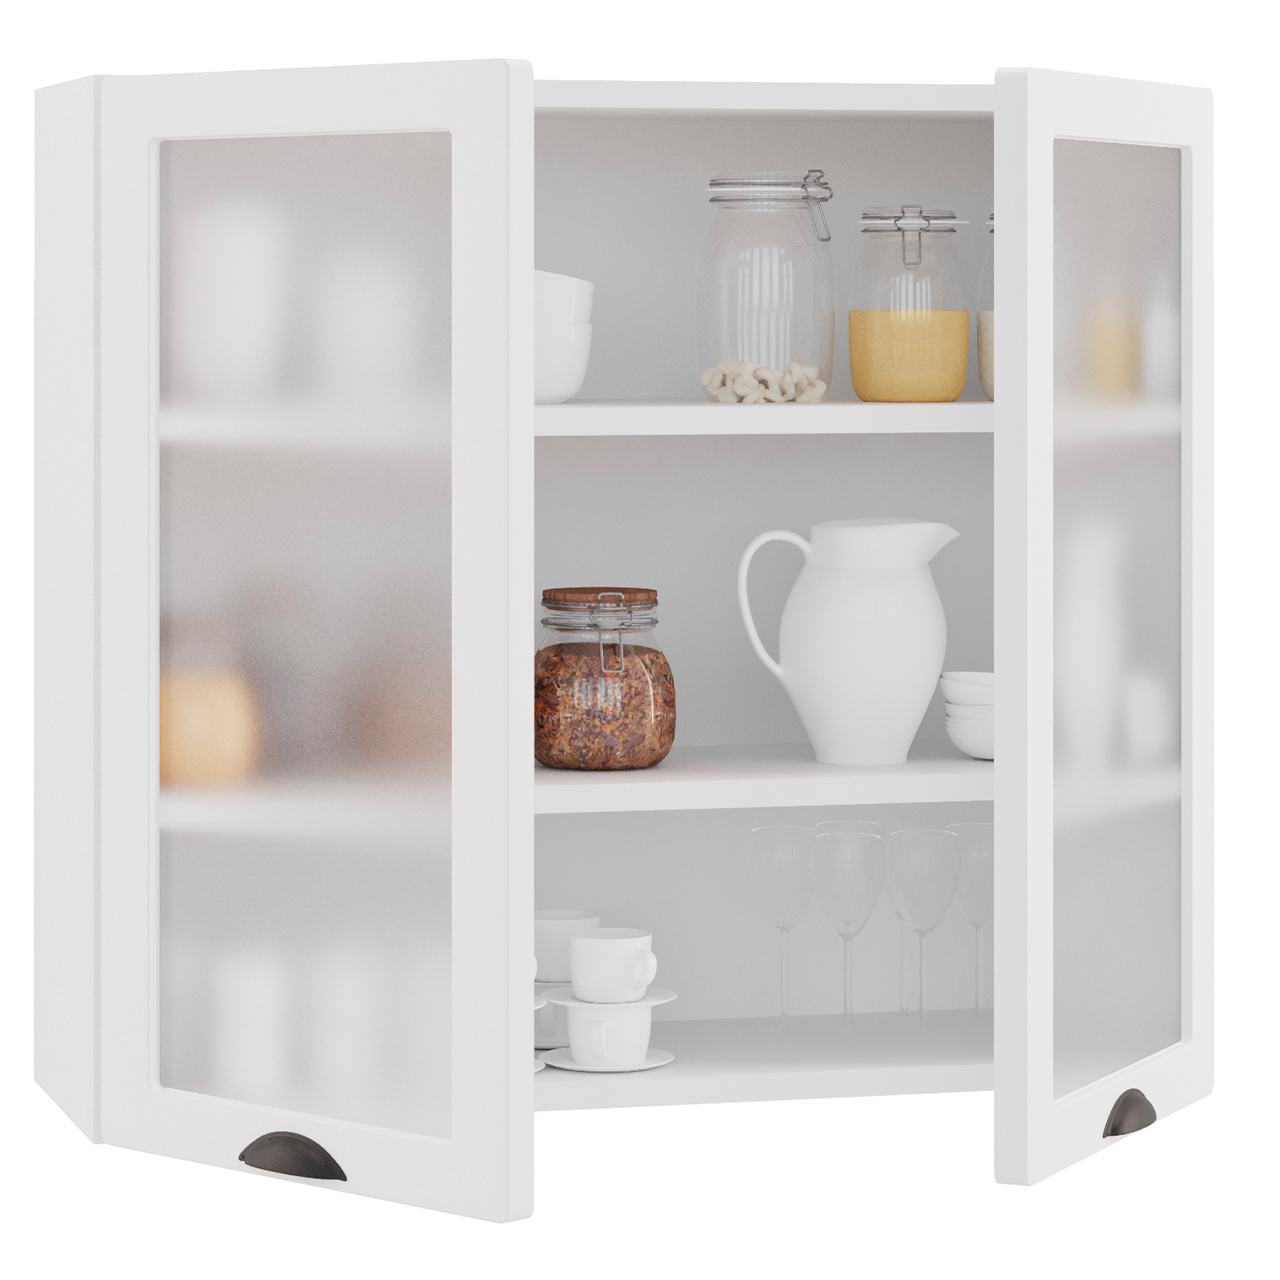 Wall Cabinet with Glass Door ADELE WS80 white